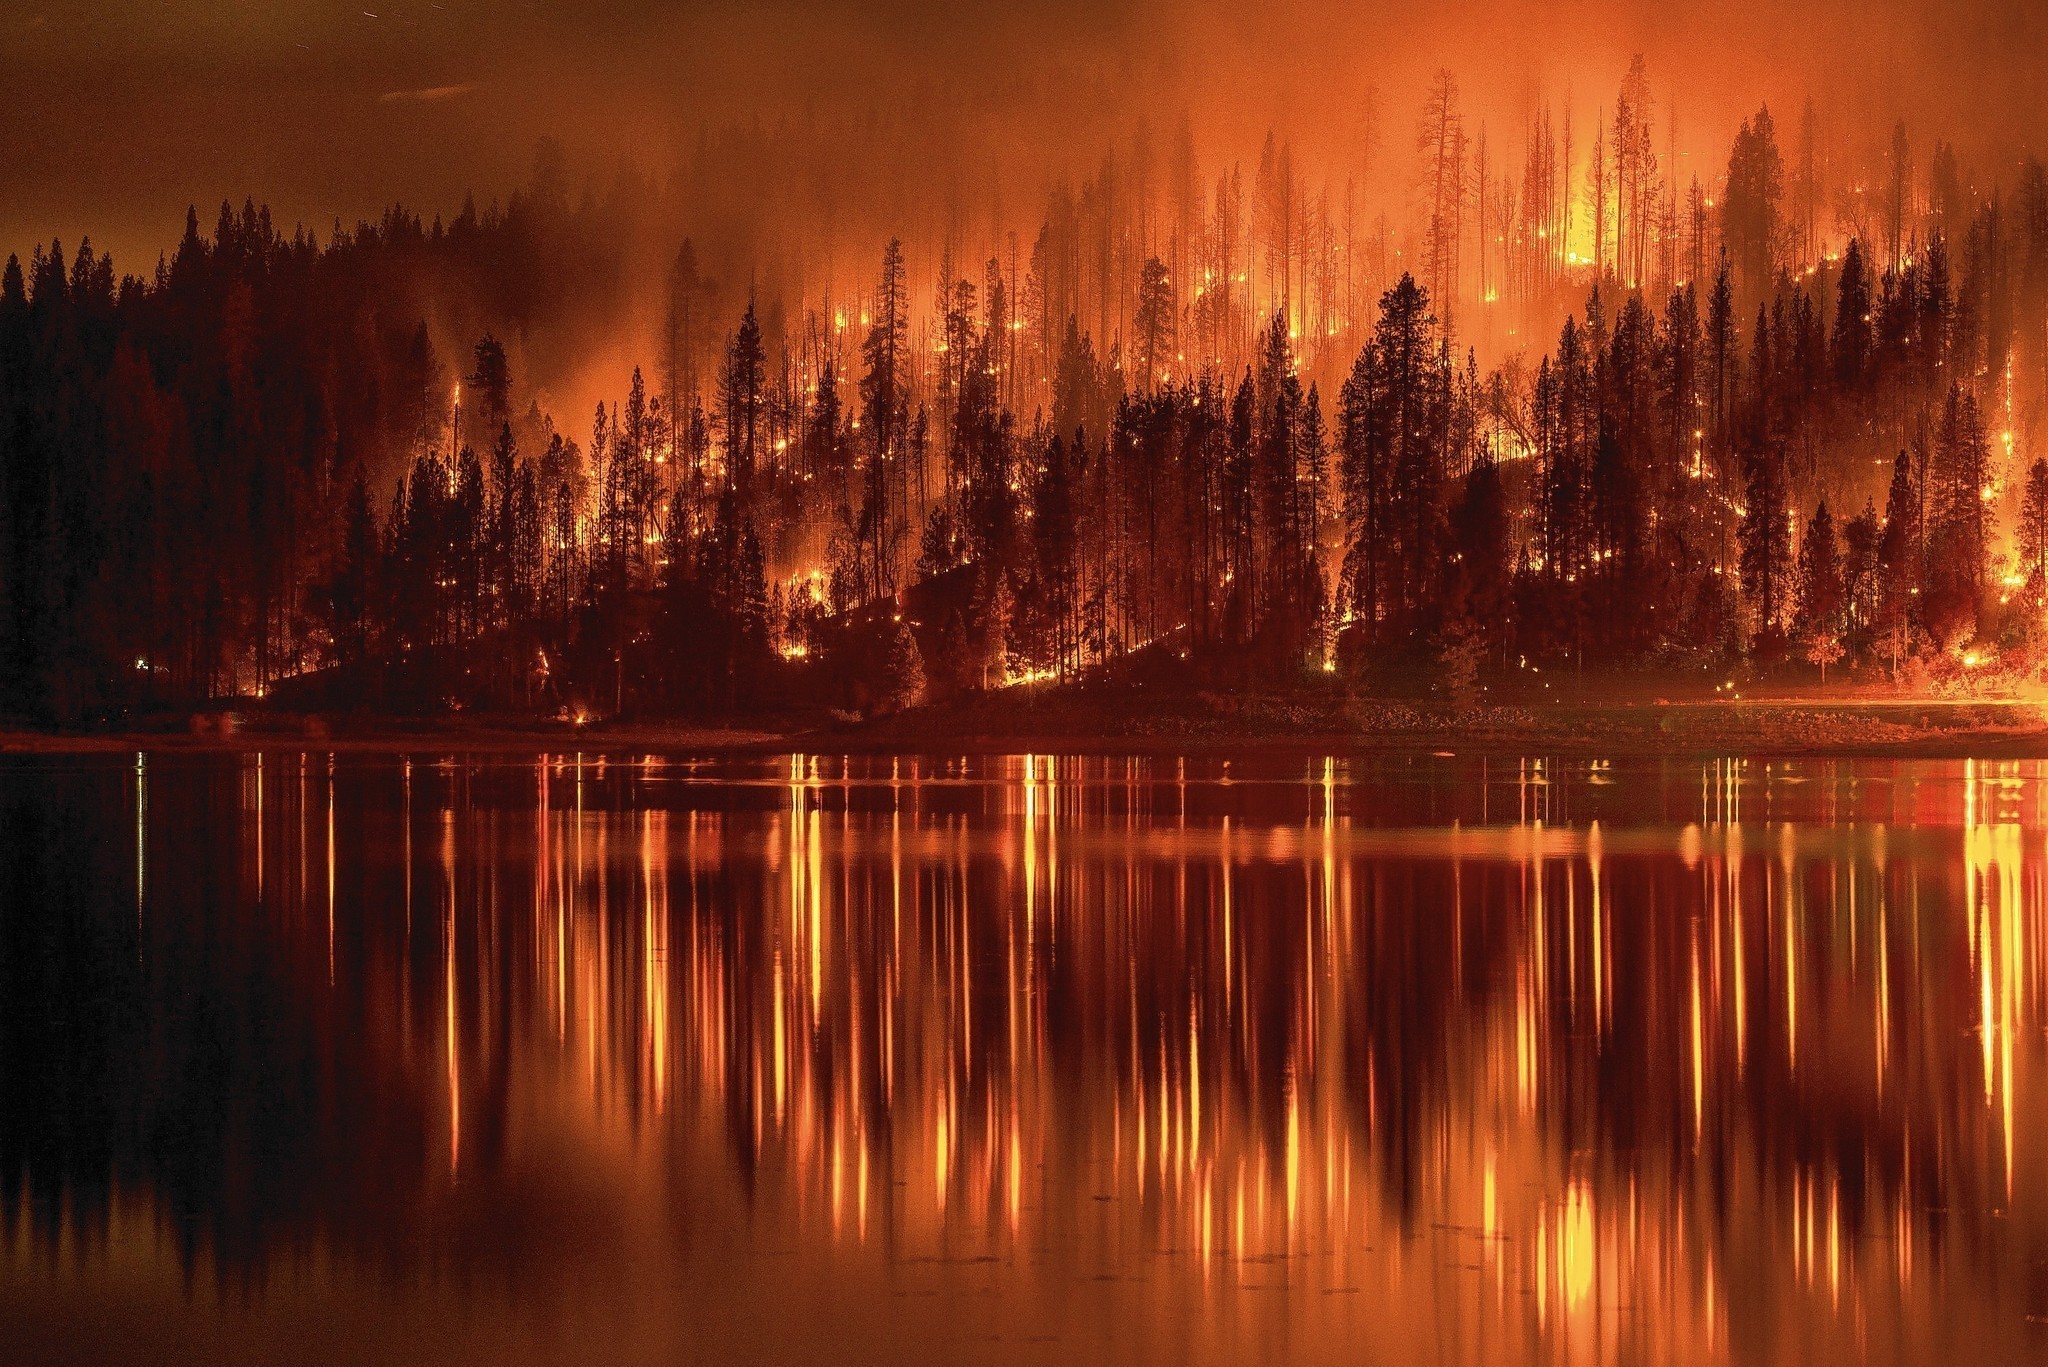 General 2048x1367 fire forest lake reflection hell orange nature burning